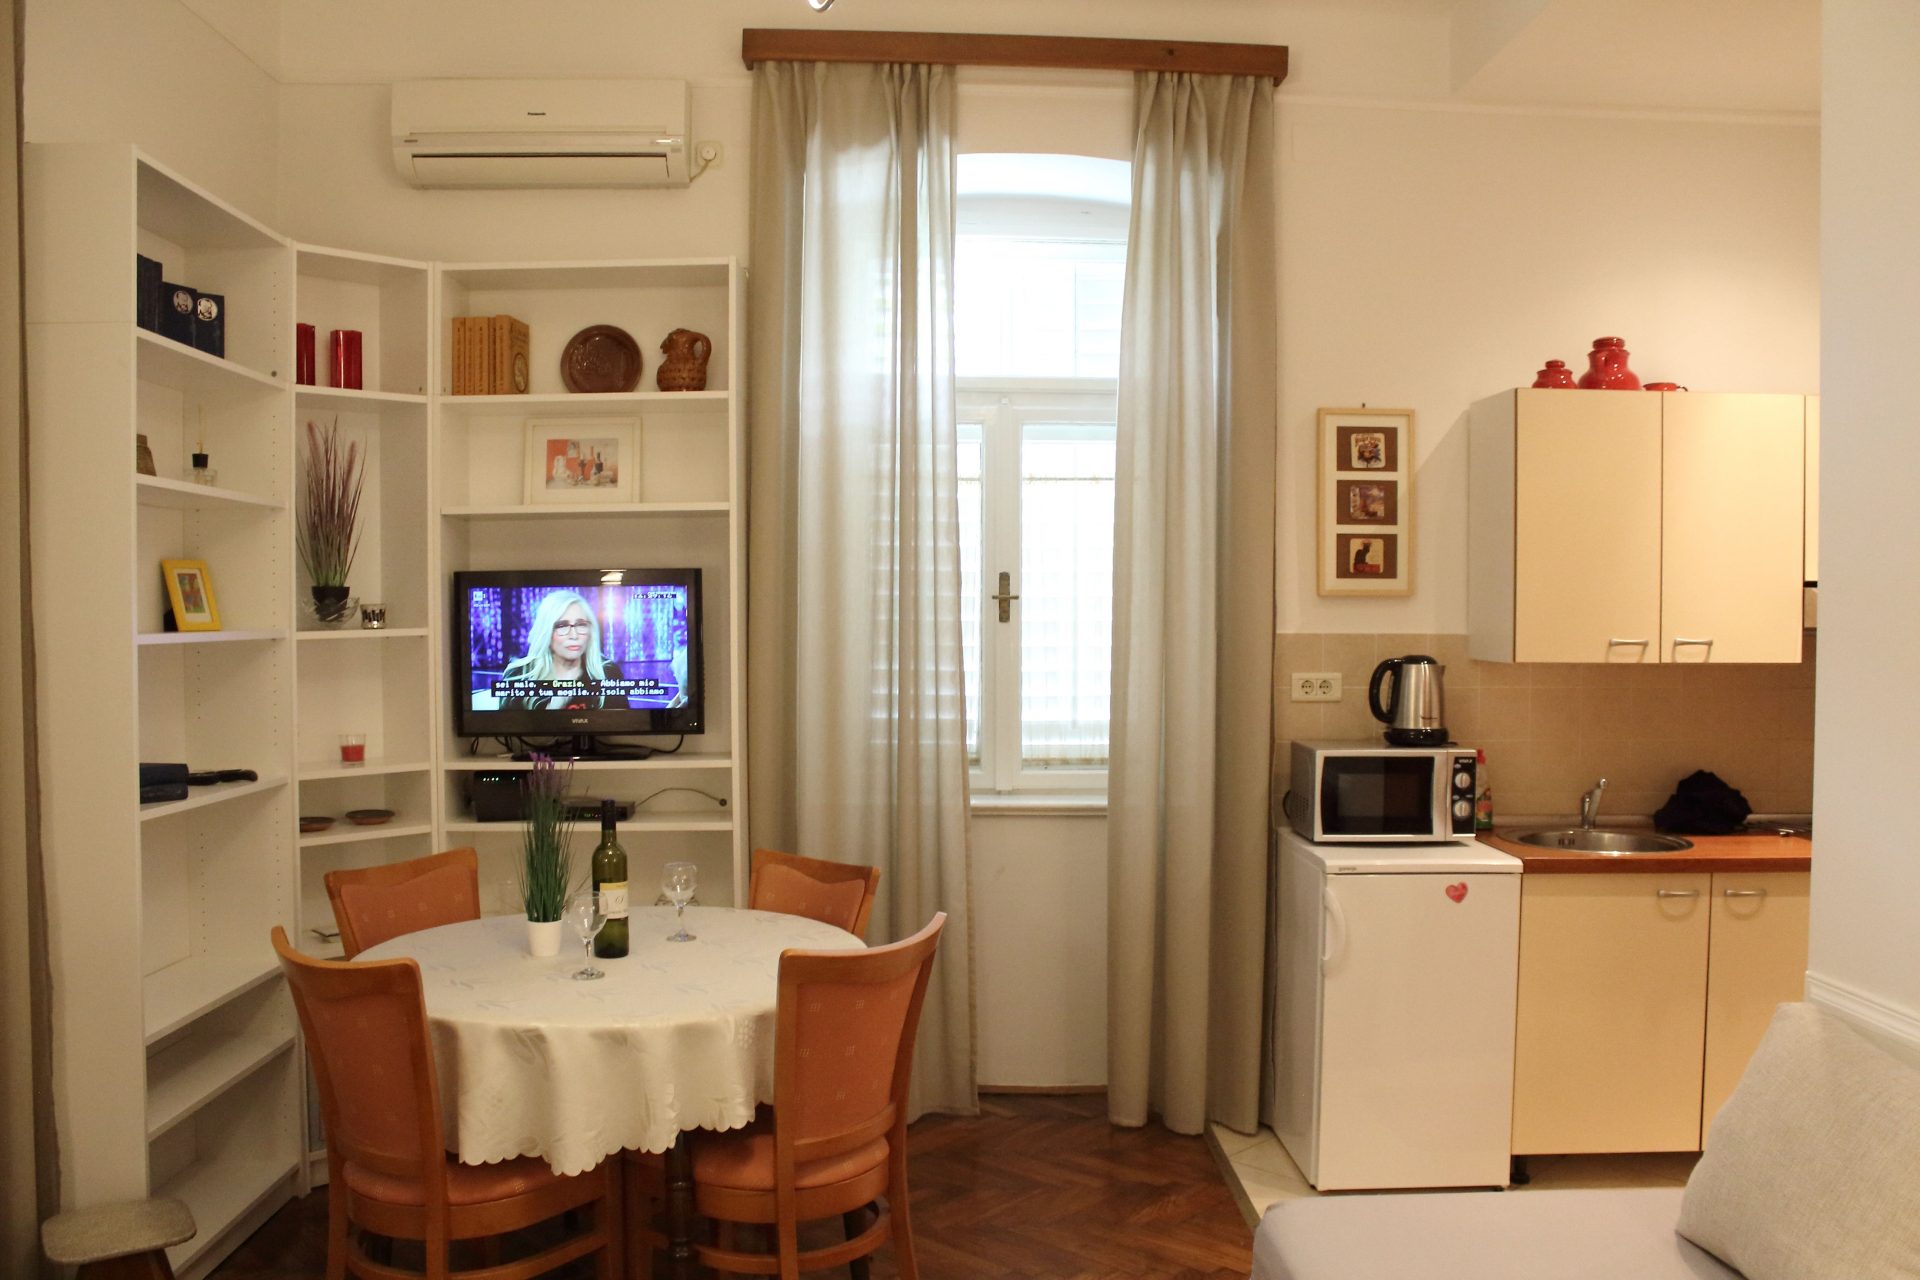 Lovely holiday rental for couple near the beach in Opatija riviera